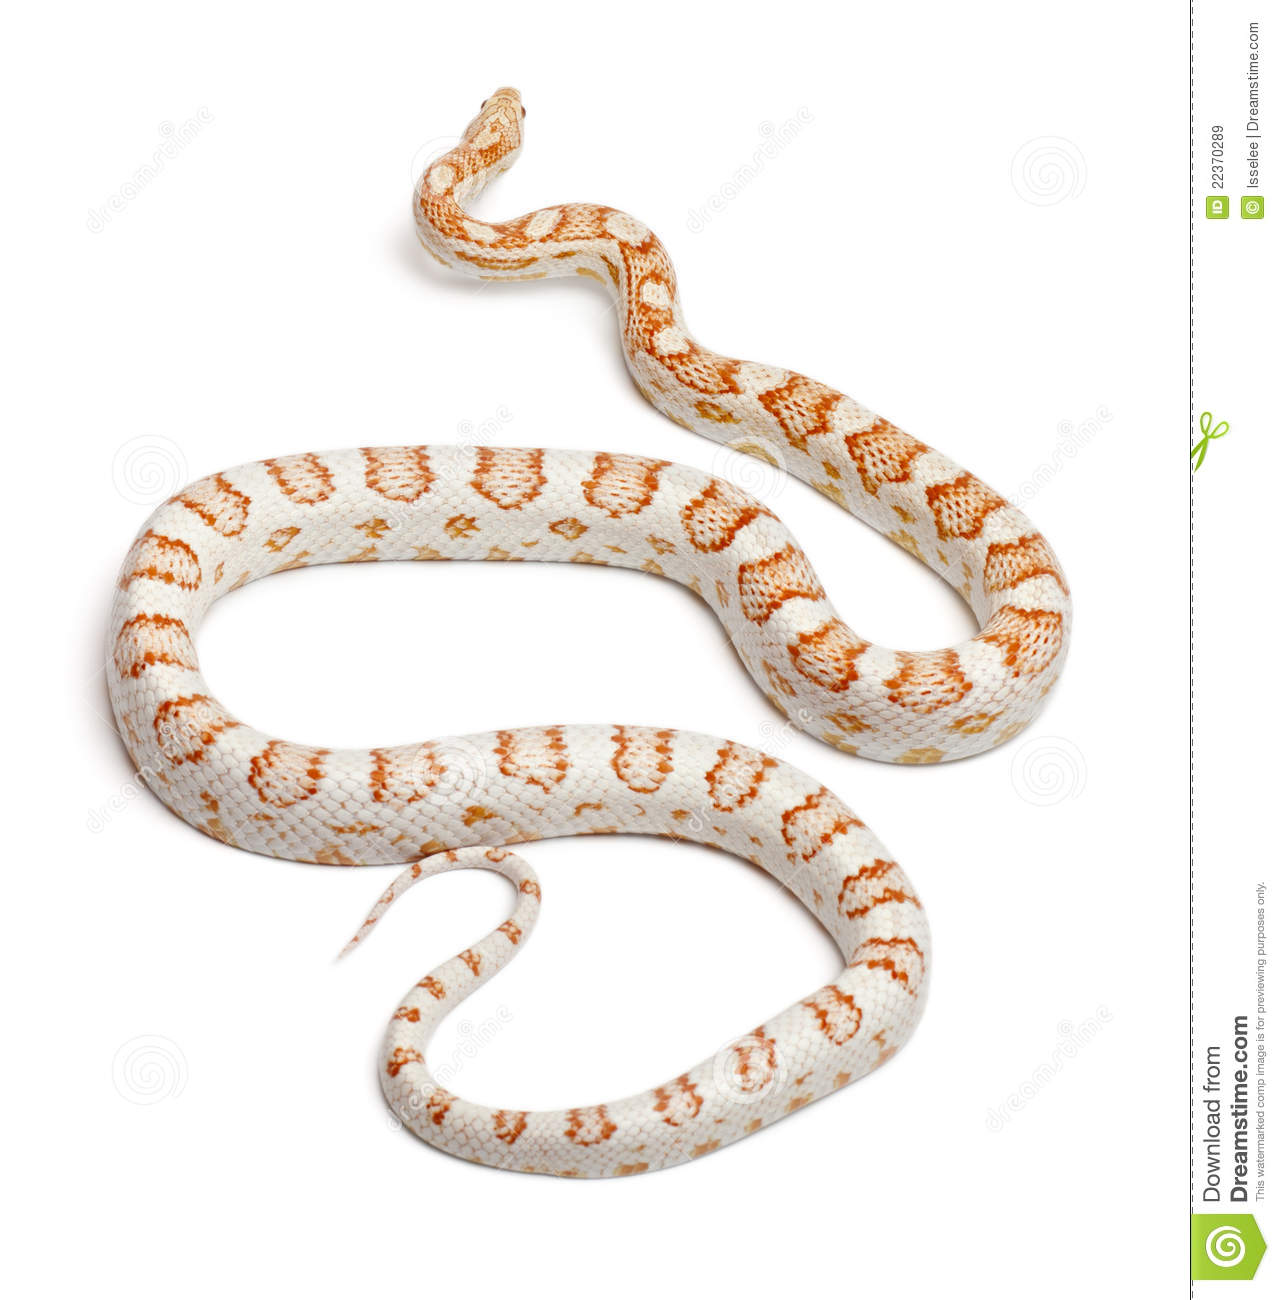 Candy Cane Corn Snake Or Red Rat Snake Pantherophis Guttatus In